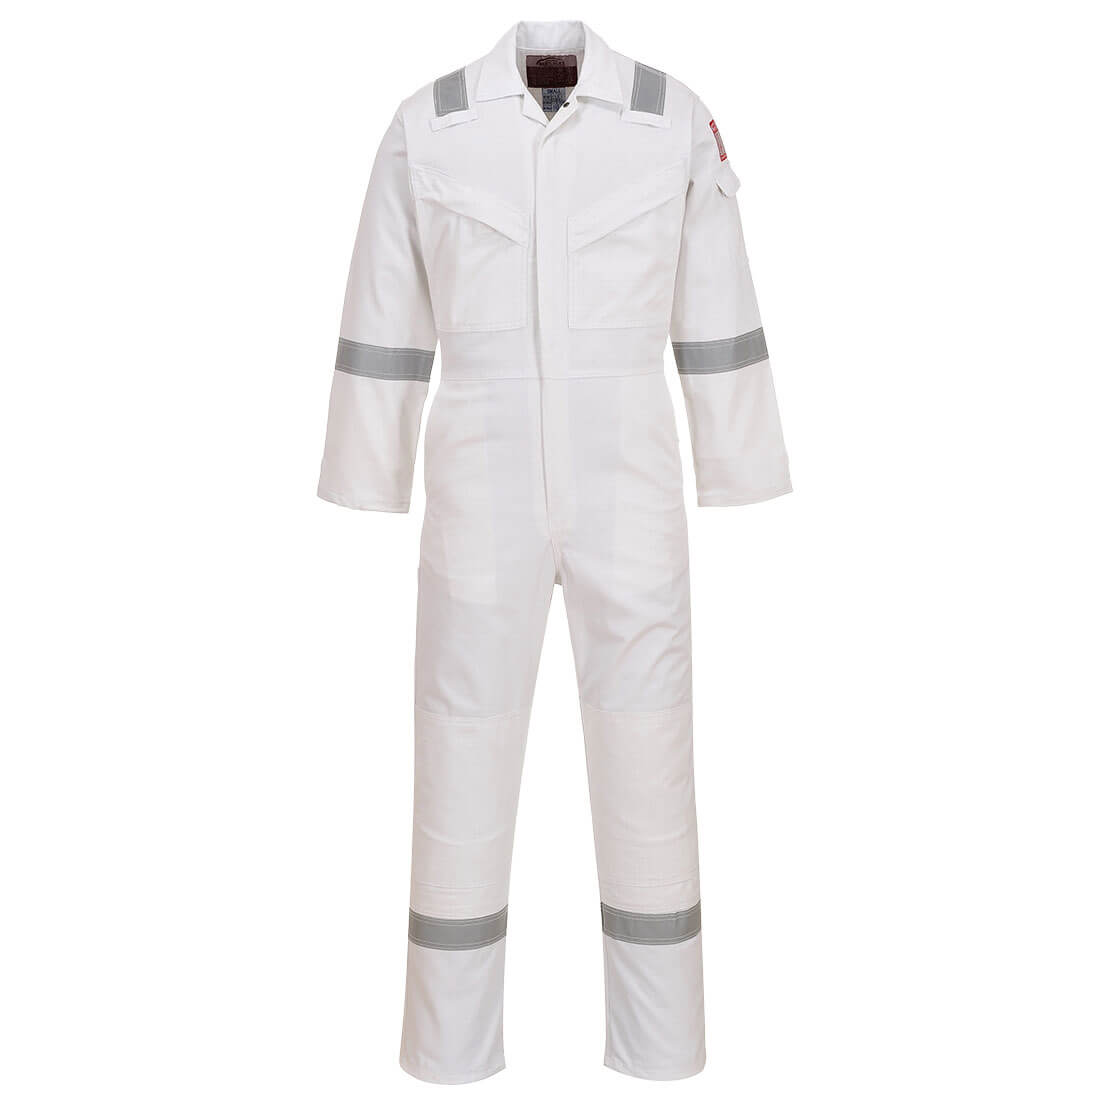 Image of Biz Flame Mens Aberdeen Flame Resistant Antistatic Coverall White 2XL 32"